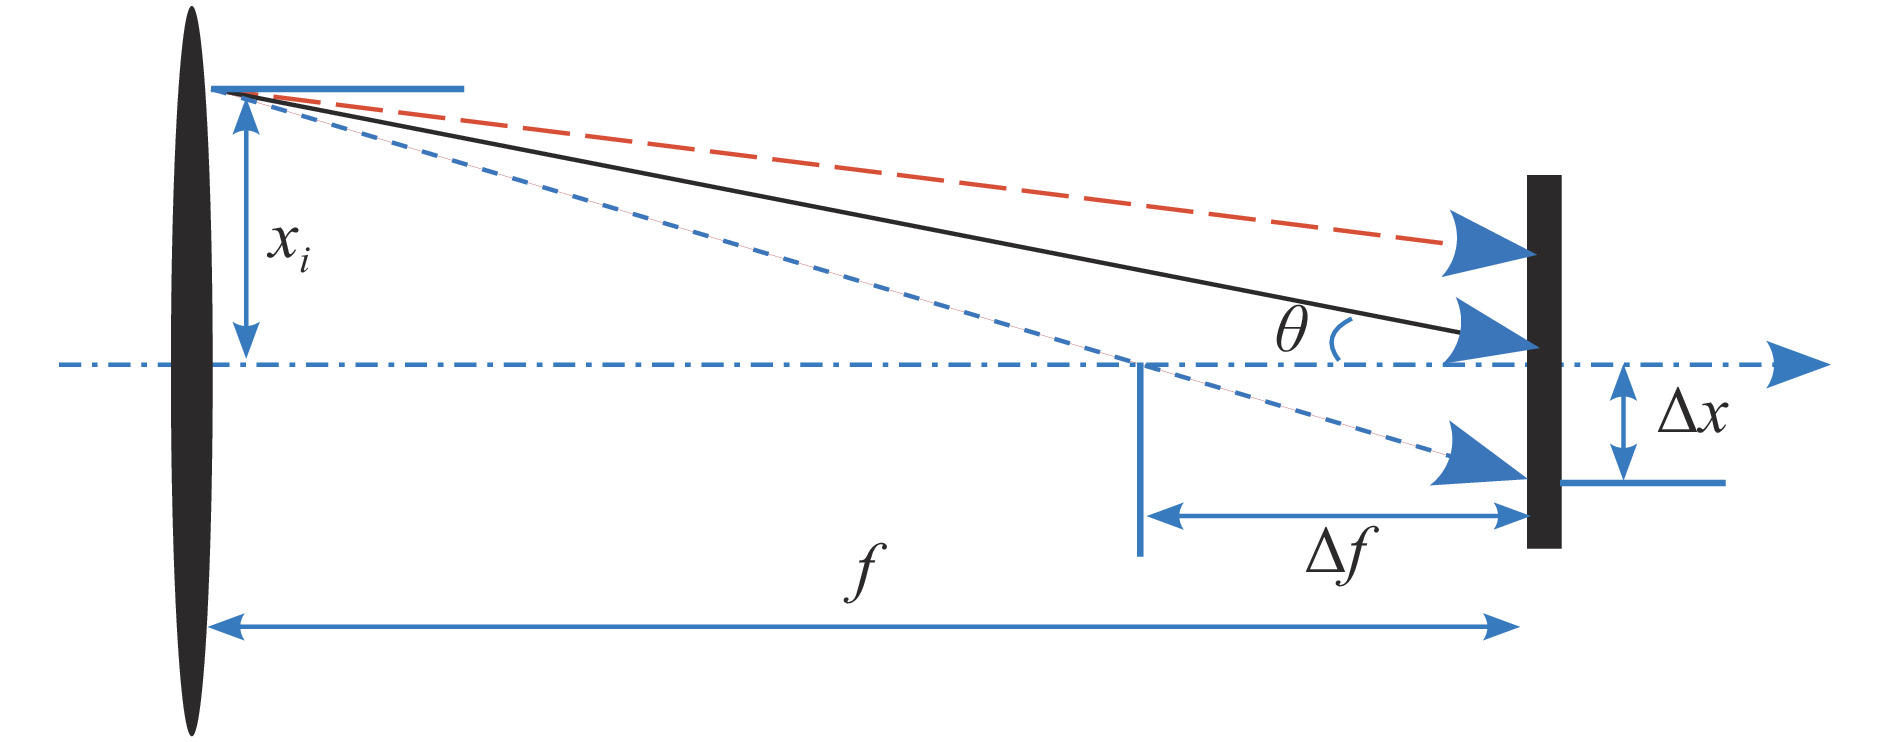 The position deviation of electrons induced by focusing length difference